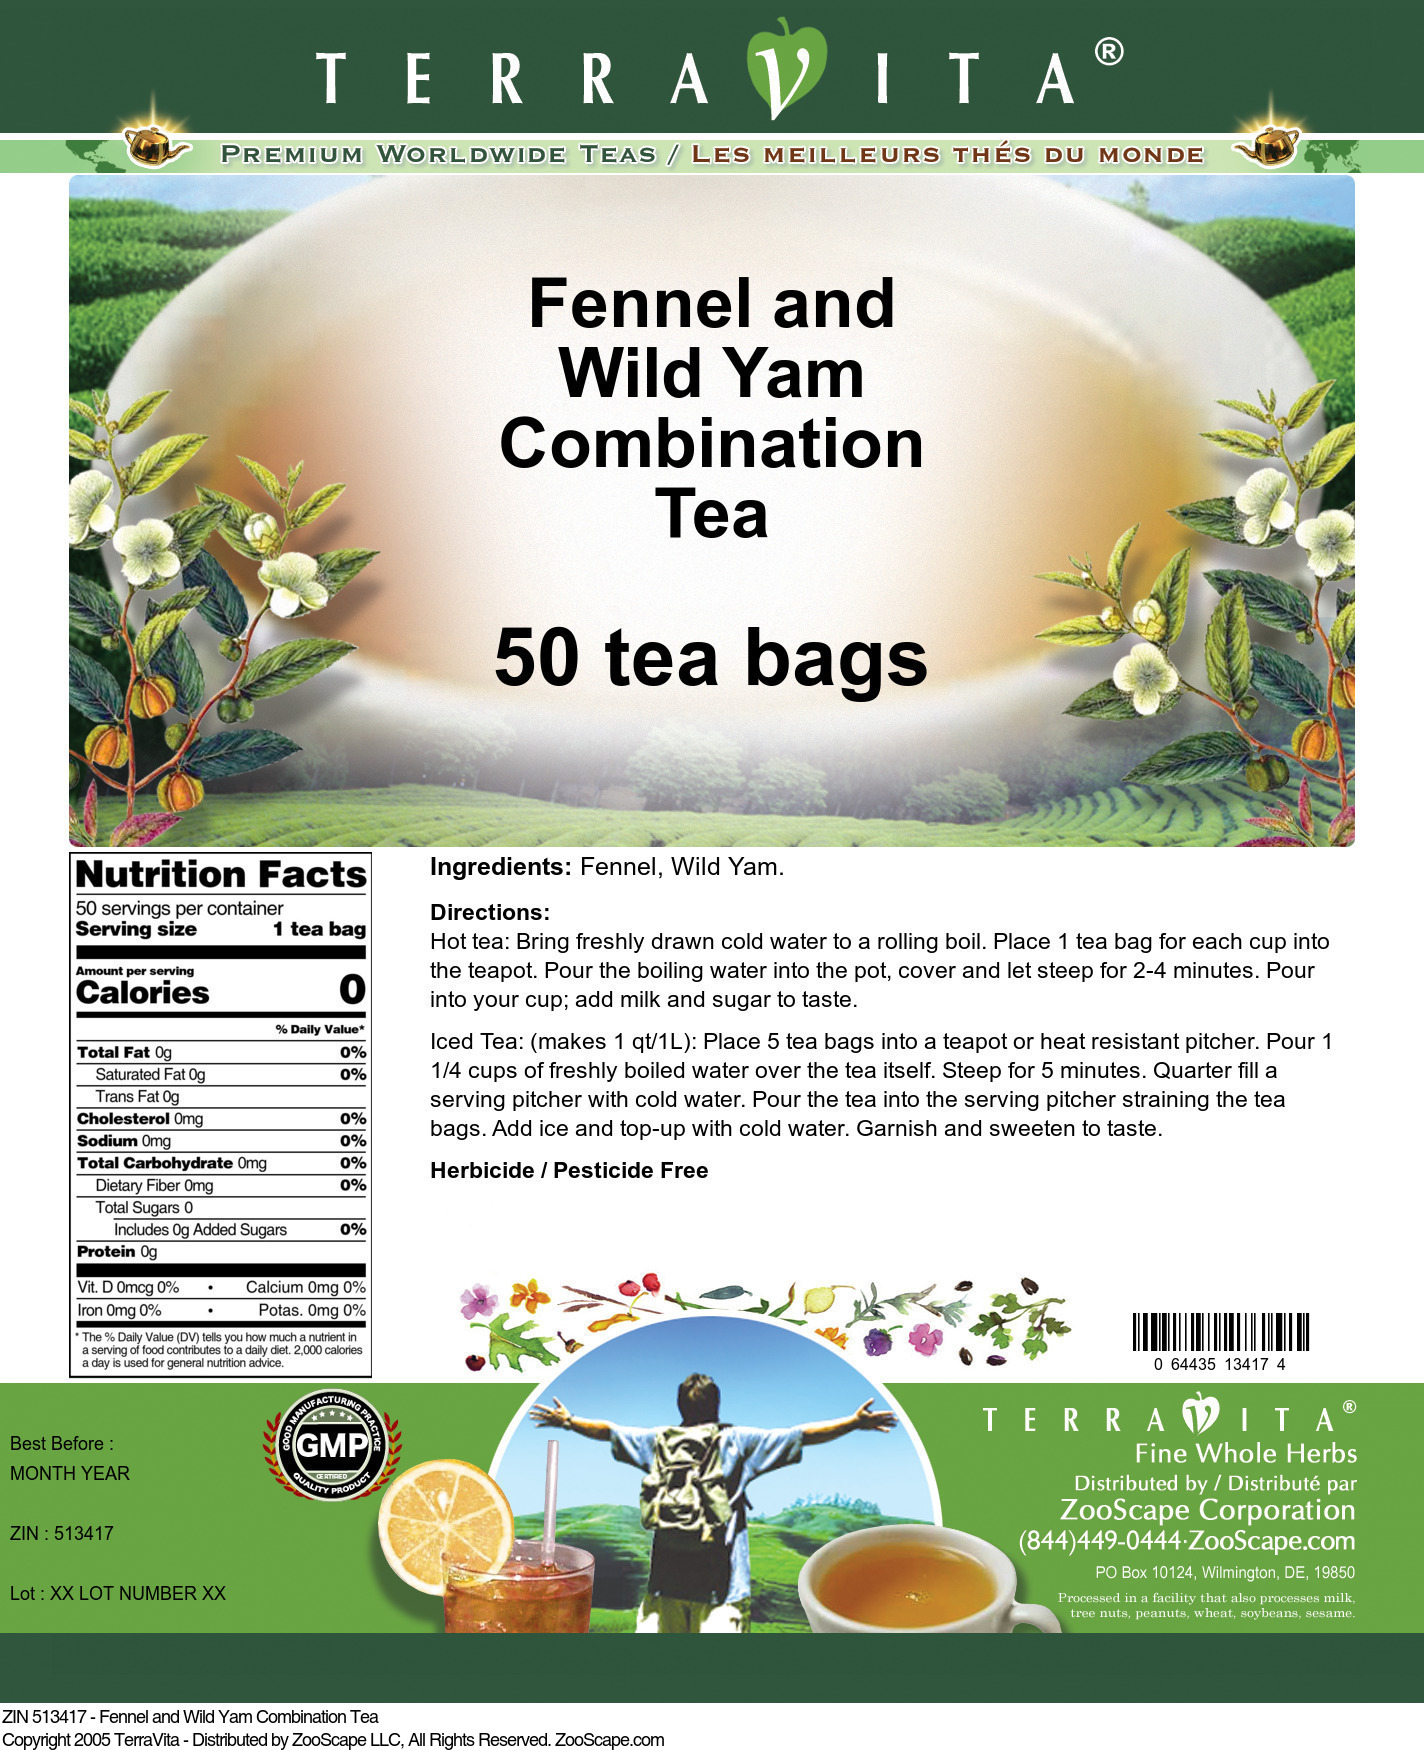 Fennel and Wild Yam Combination Tea - Label